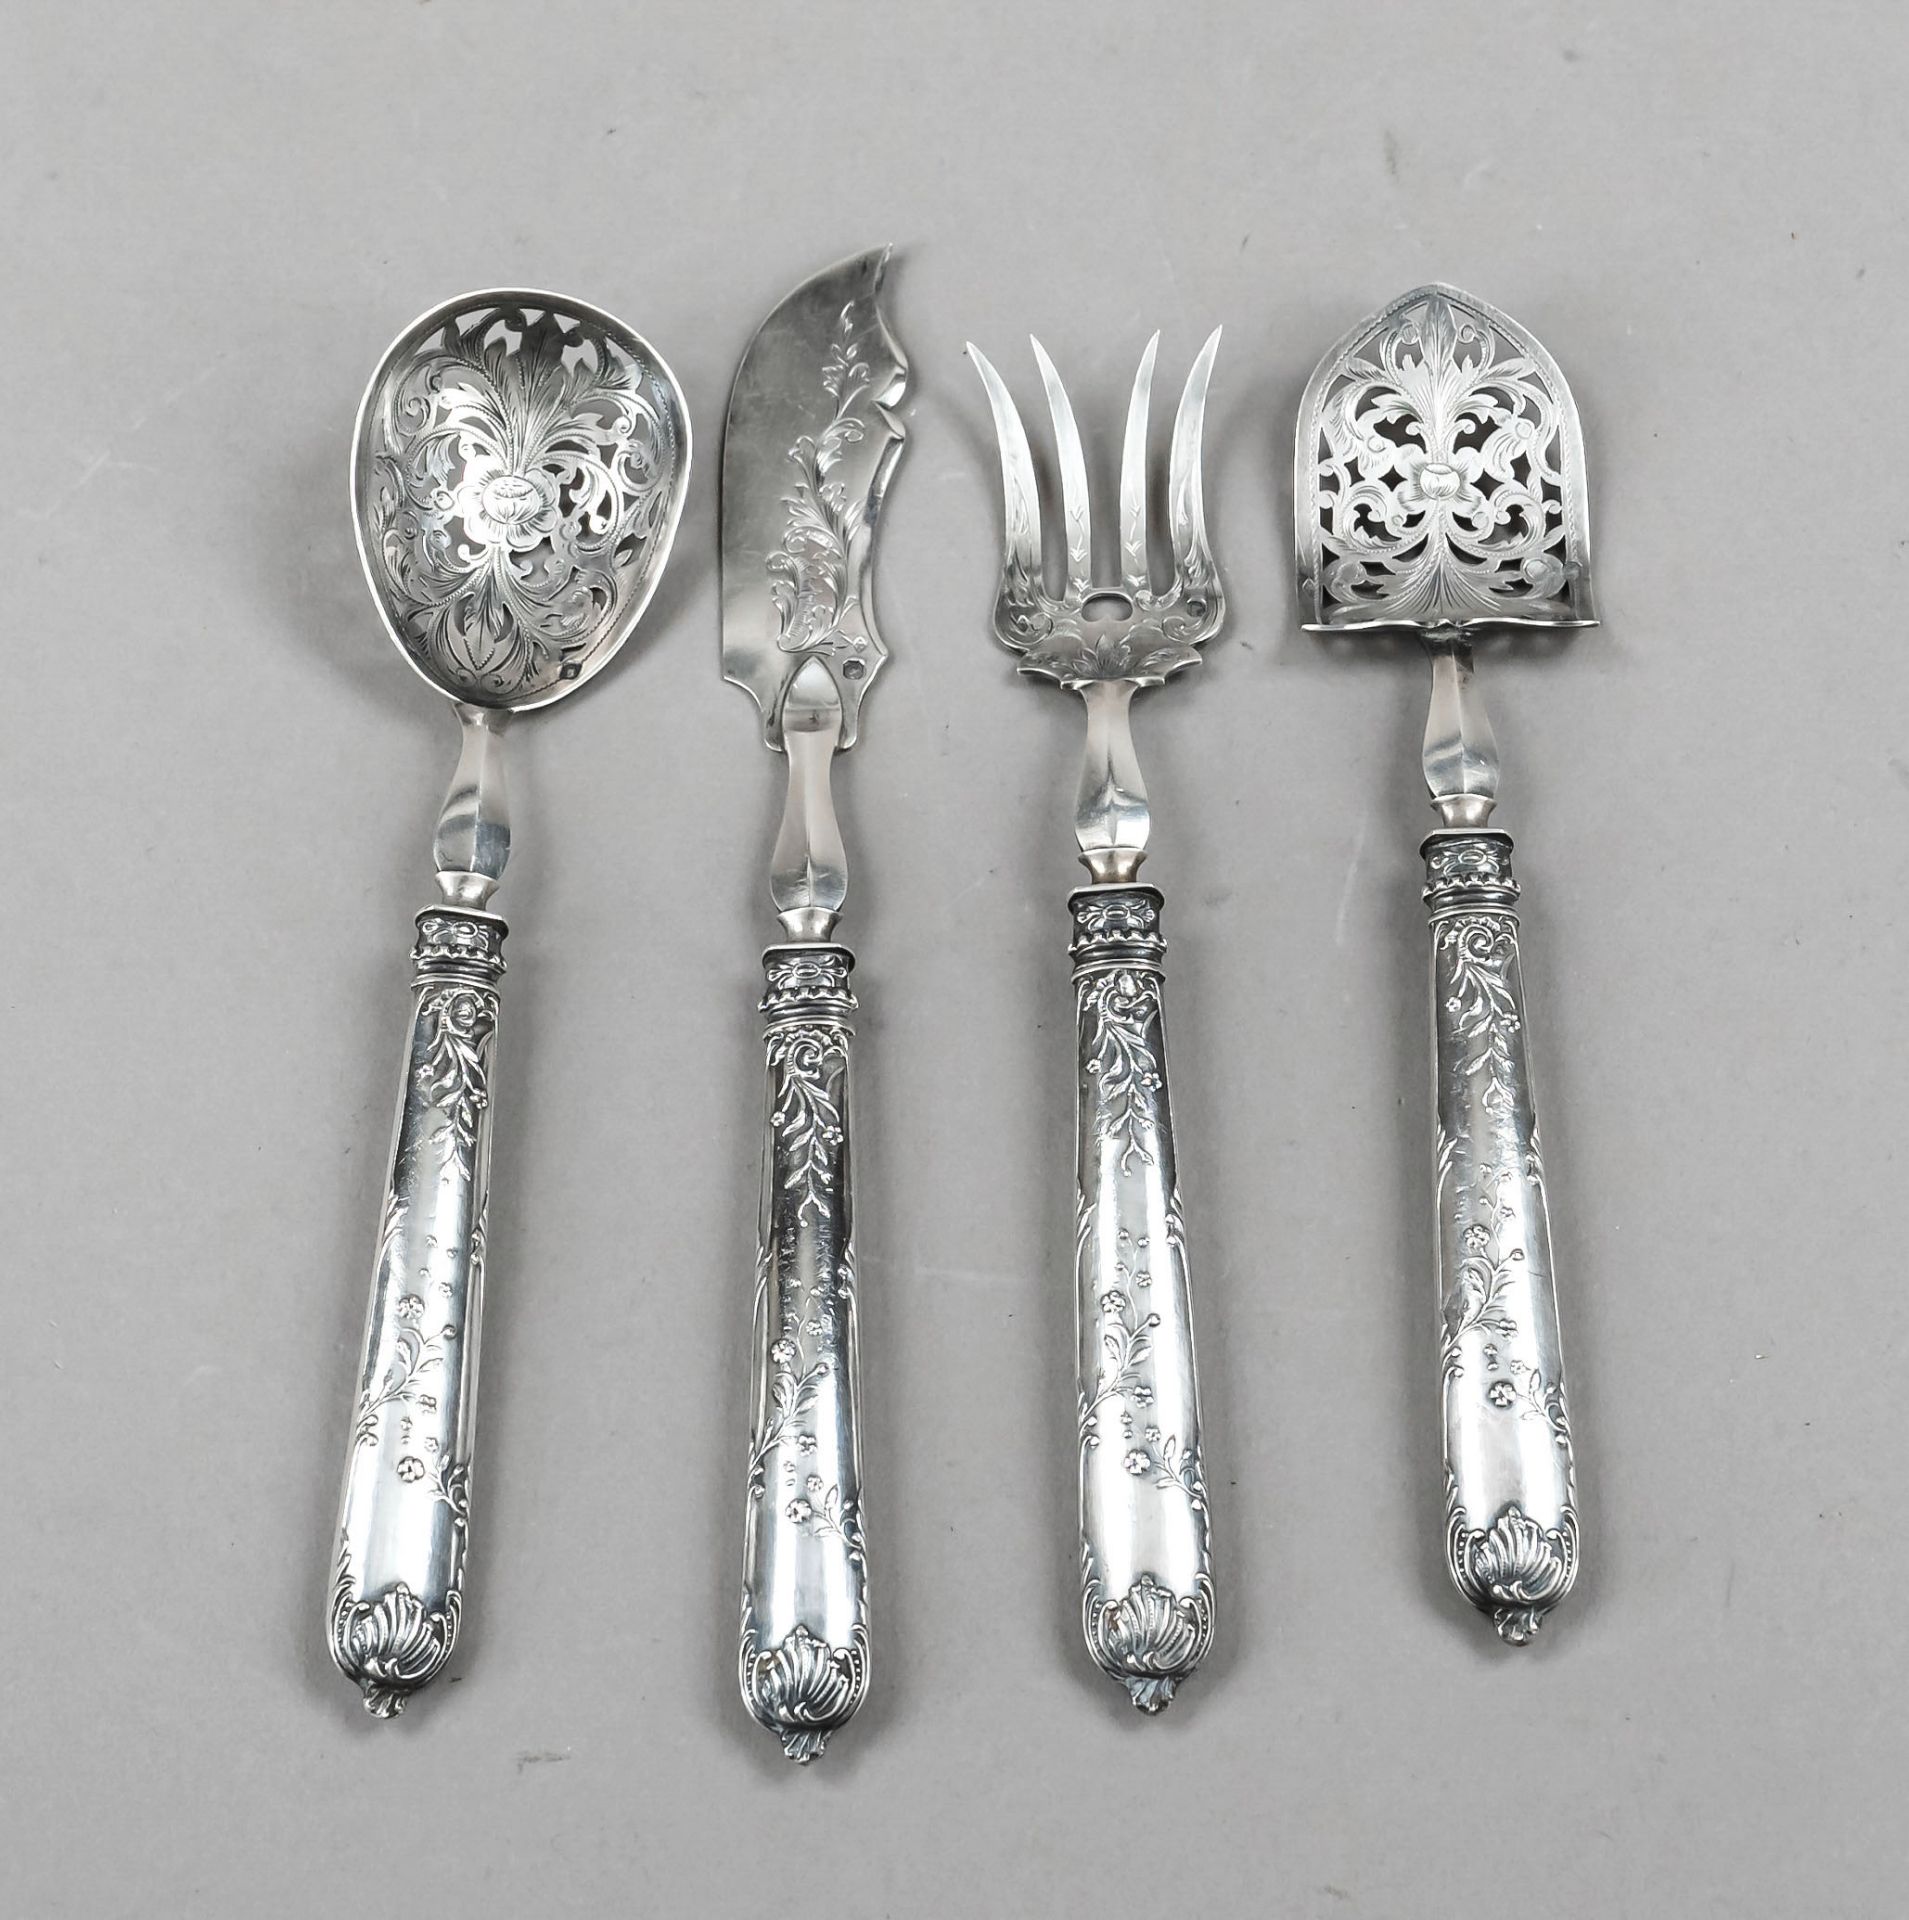 Four serving pieces, France, c. 1900, master mark EH, silver 950/000, filled handles with relief